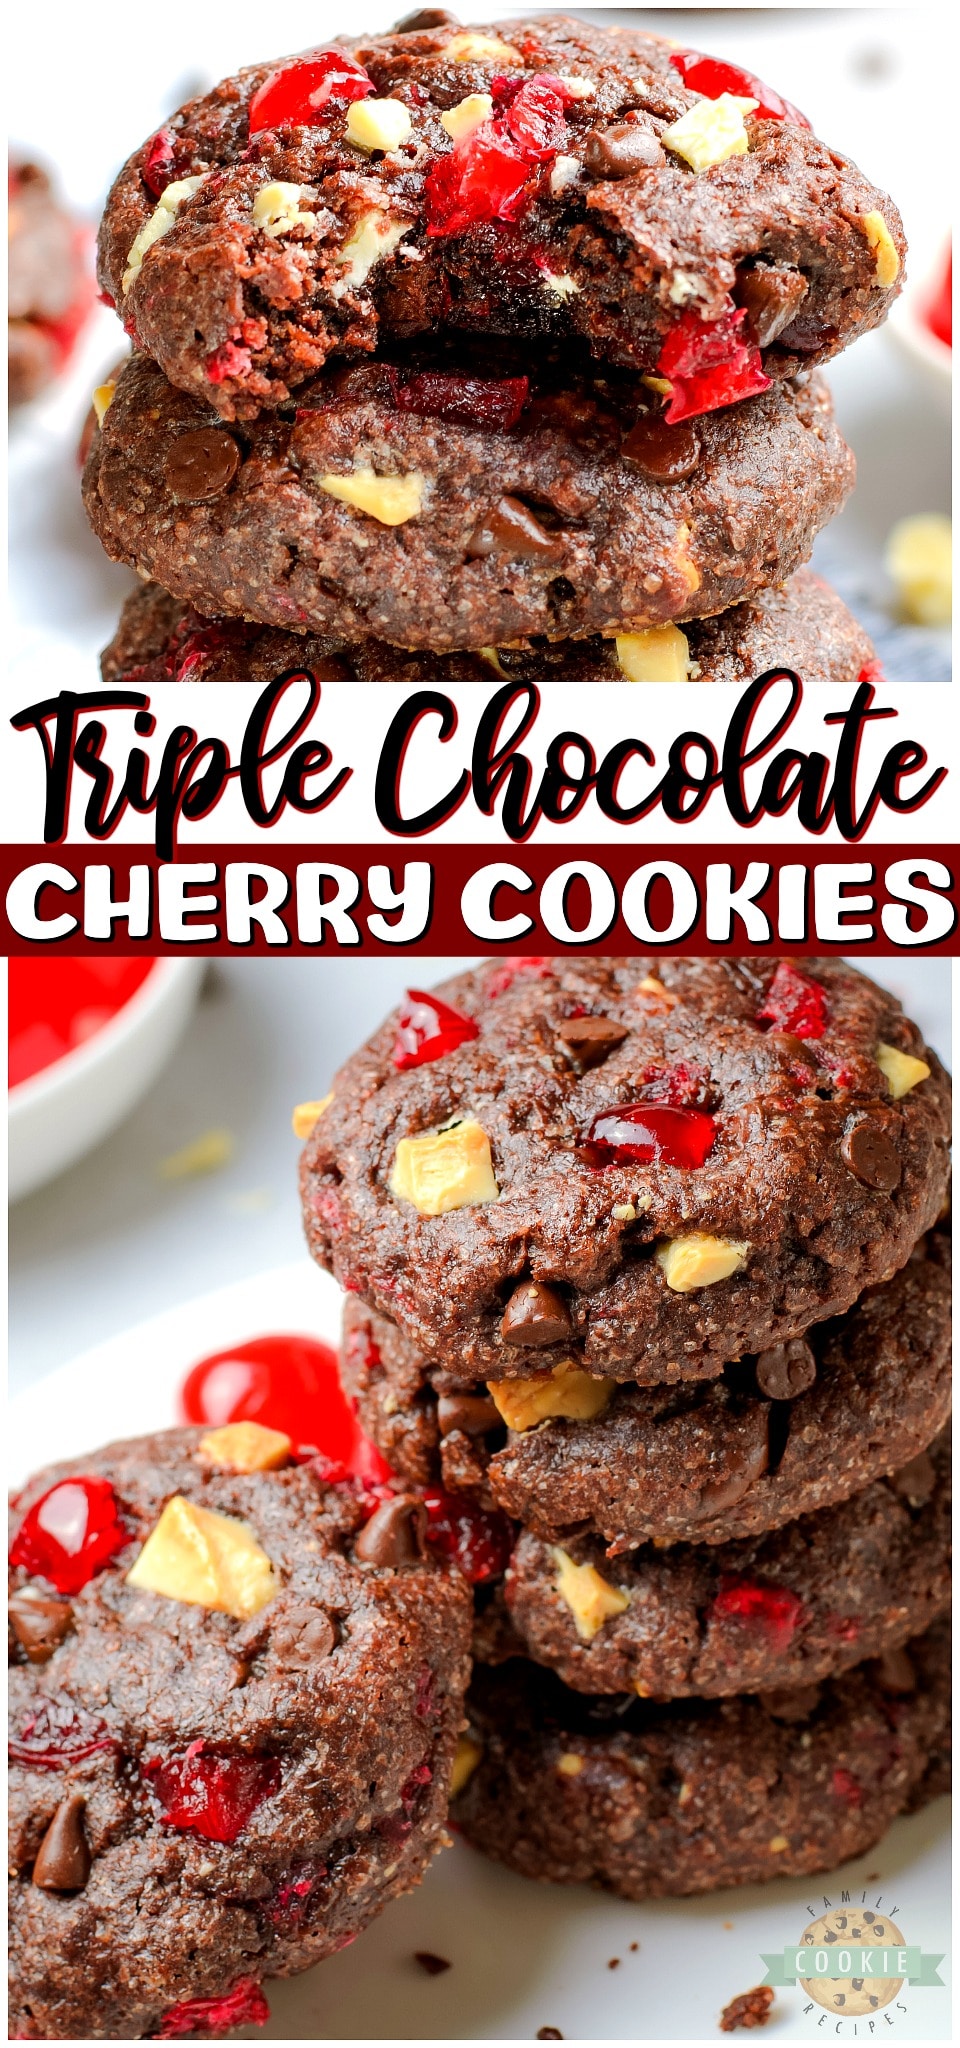 Triple Chocolate Cherry Cookies are Black Forest Cake in cookie form! Soft & chewy chocolate cookies full of white and dark chocolate chips & cherry bits with lovely flavor! #cookies #chocolate #cherry #cherrycookies #cherries #baking #dessert from FAMILY COOKIE RECIPES via @buttergirls